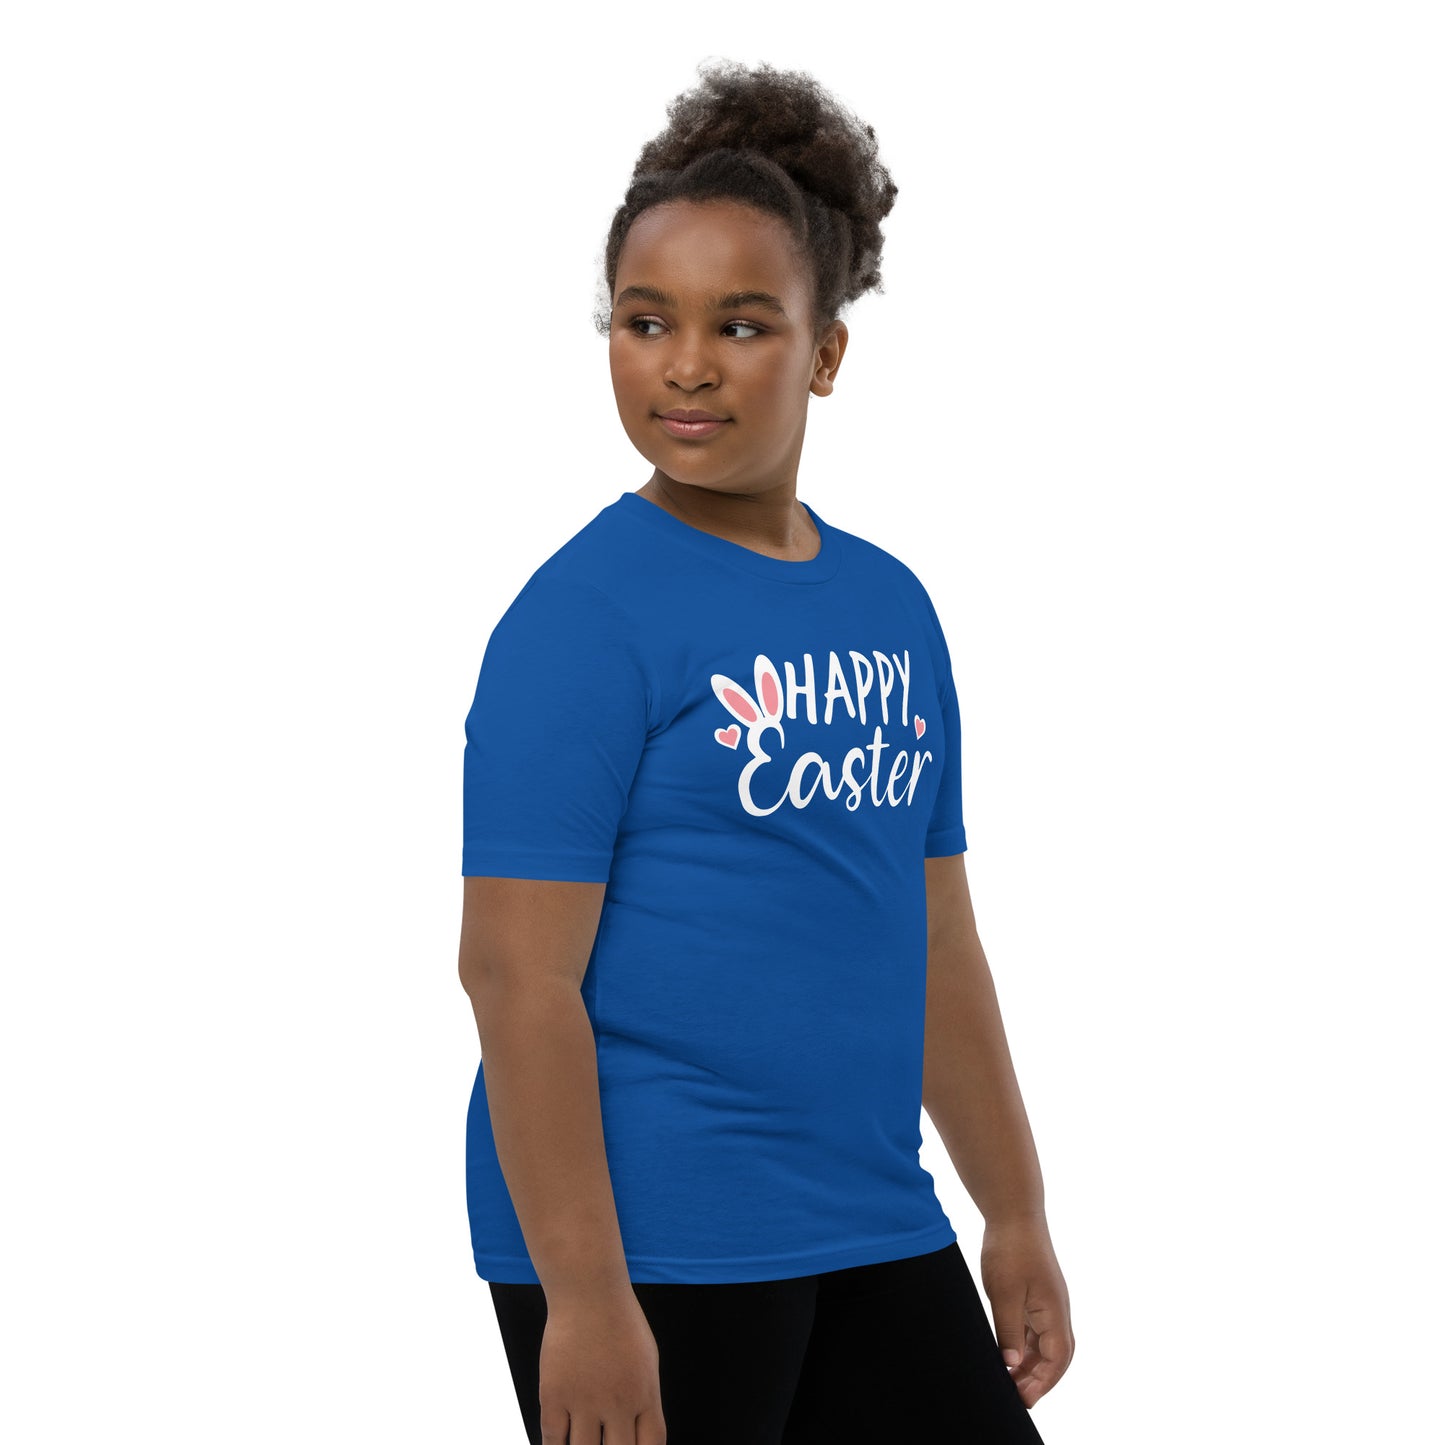 Happy Easter Youth T-Shirt